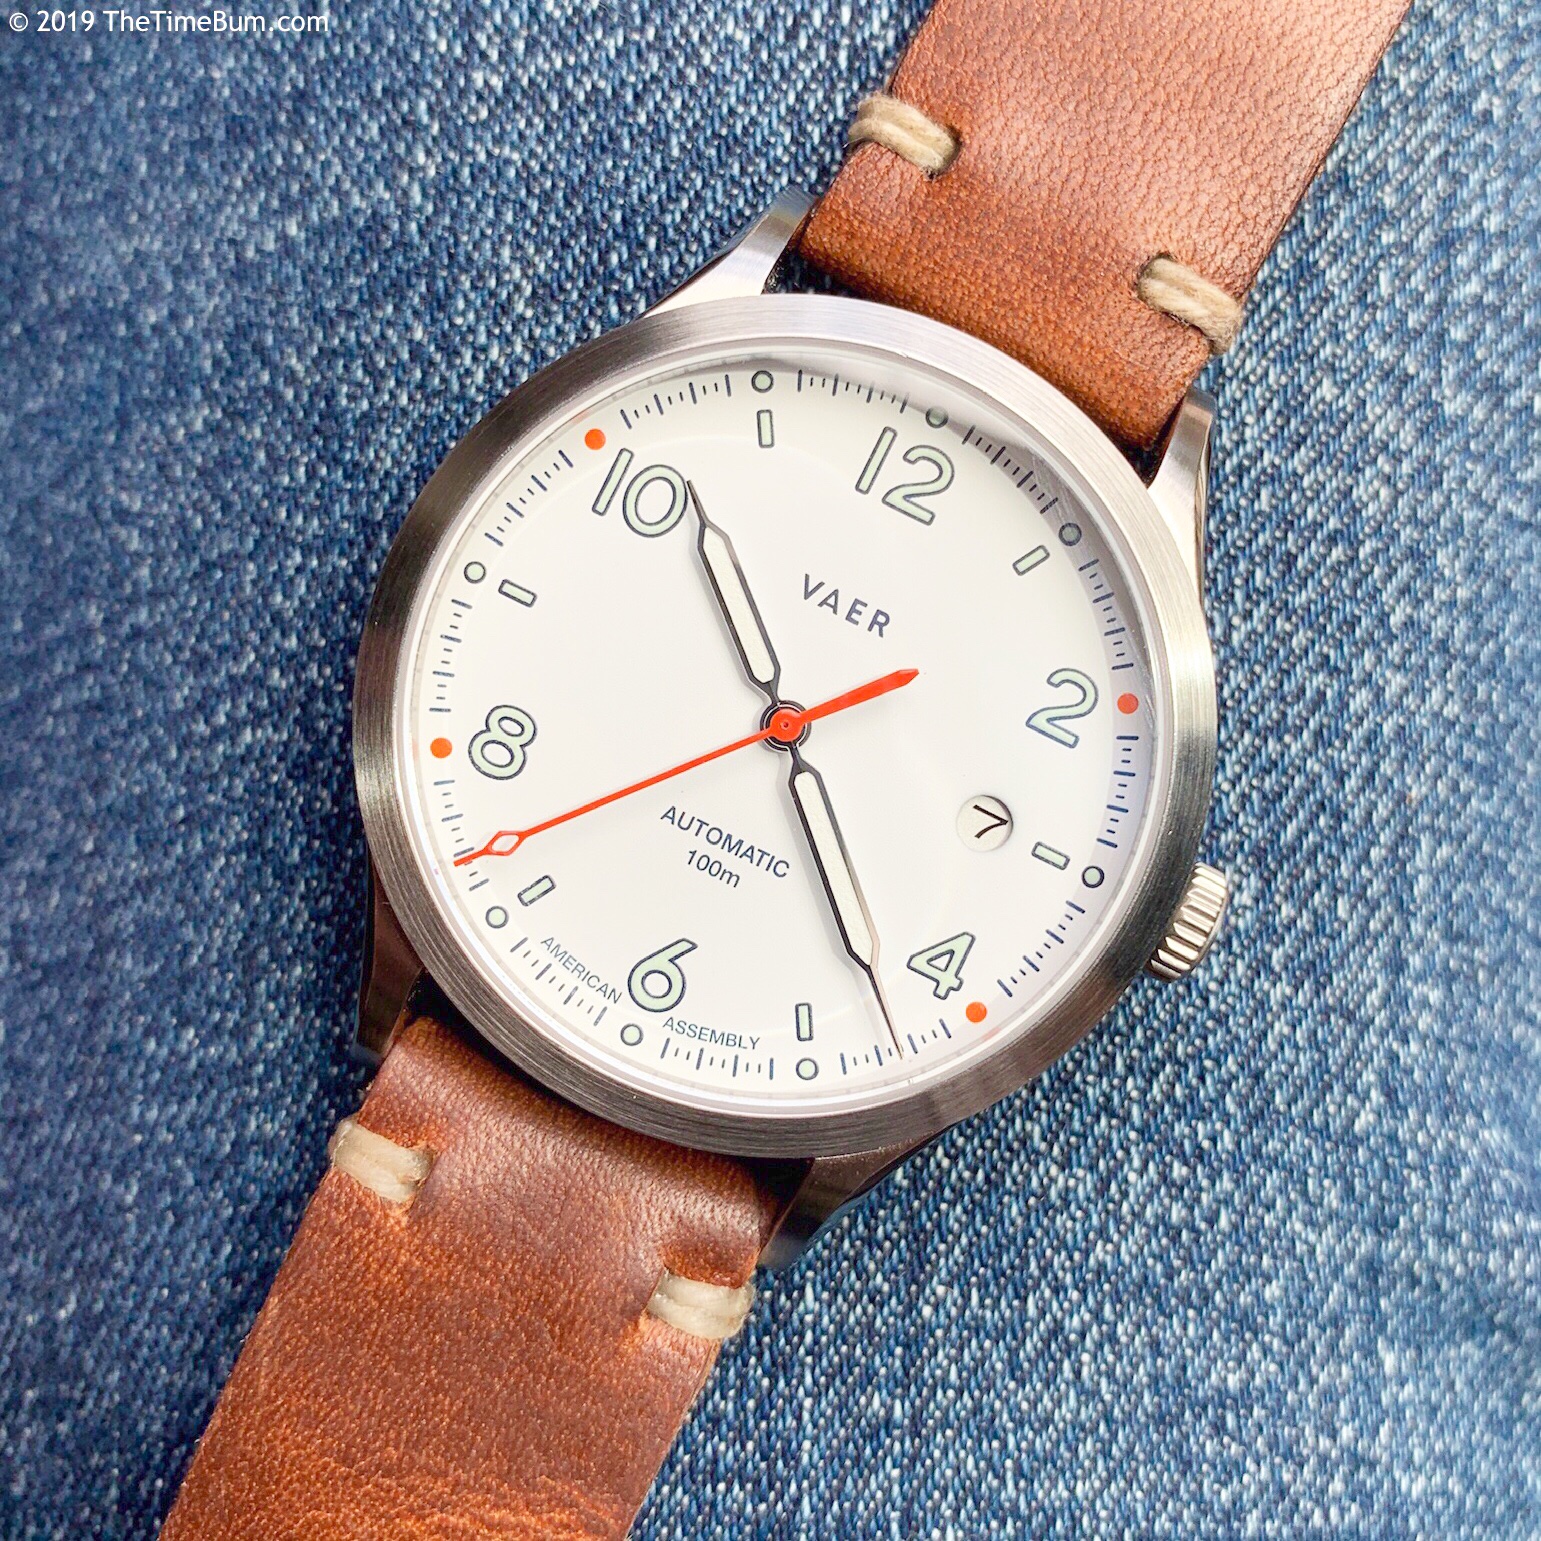 American Made - A Detailed Look at Our Vaer Horween Leather Watch Strap